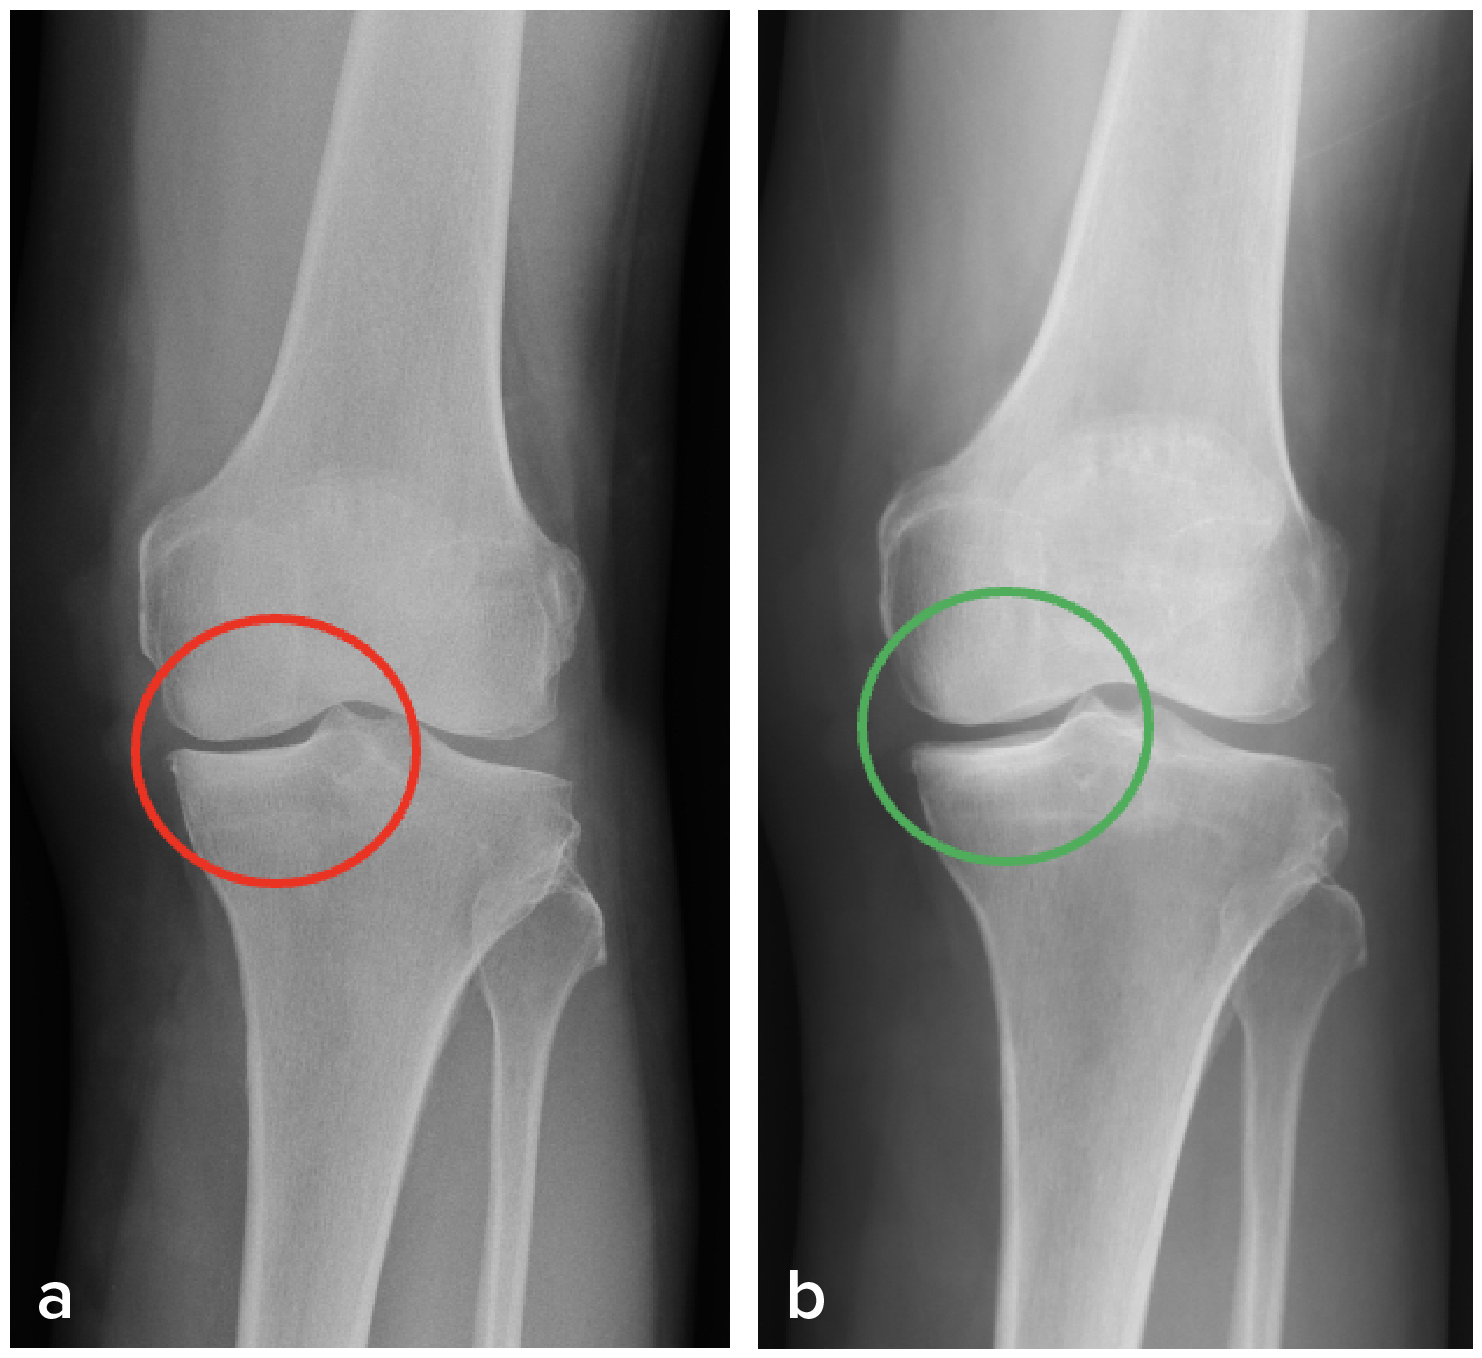 Figure 2. Another example of how SKC stops knee cartilage degeneration and facilitates its regeneration can be found in a 61-year-old male patient having stage III OA over the medial compartment of both his knees (a). We recommended that he practices SKC. One year later, obvious improvements in the radiographic manifestation could be observed in both his knees (b).